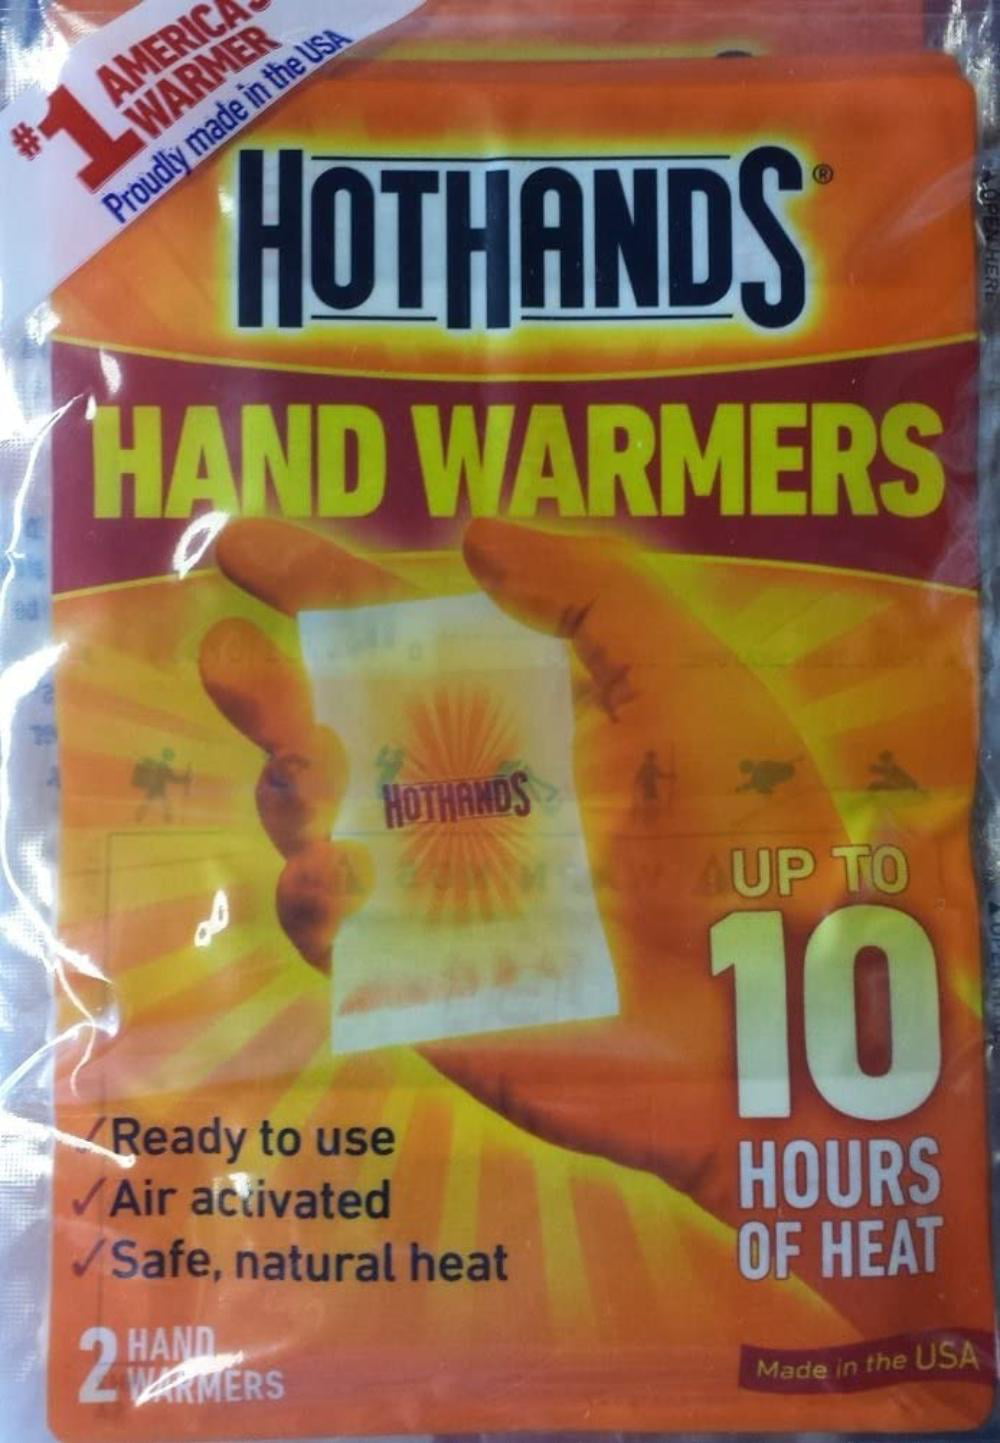 FF HotHands Hand Warmers Ready to Use 3 Pair Pk 10 Hrs of Heat Exp 1/20 